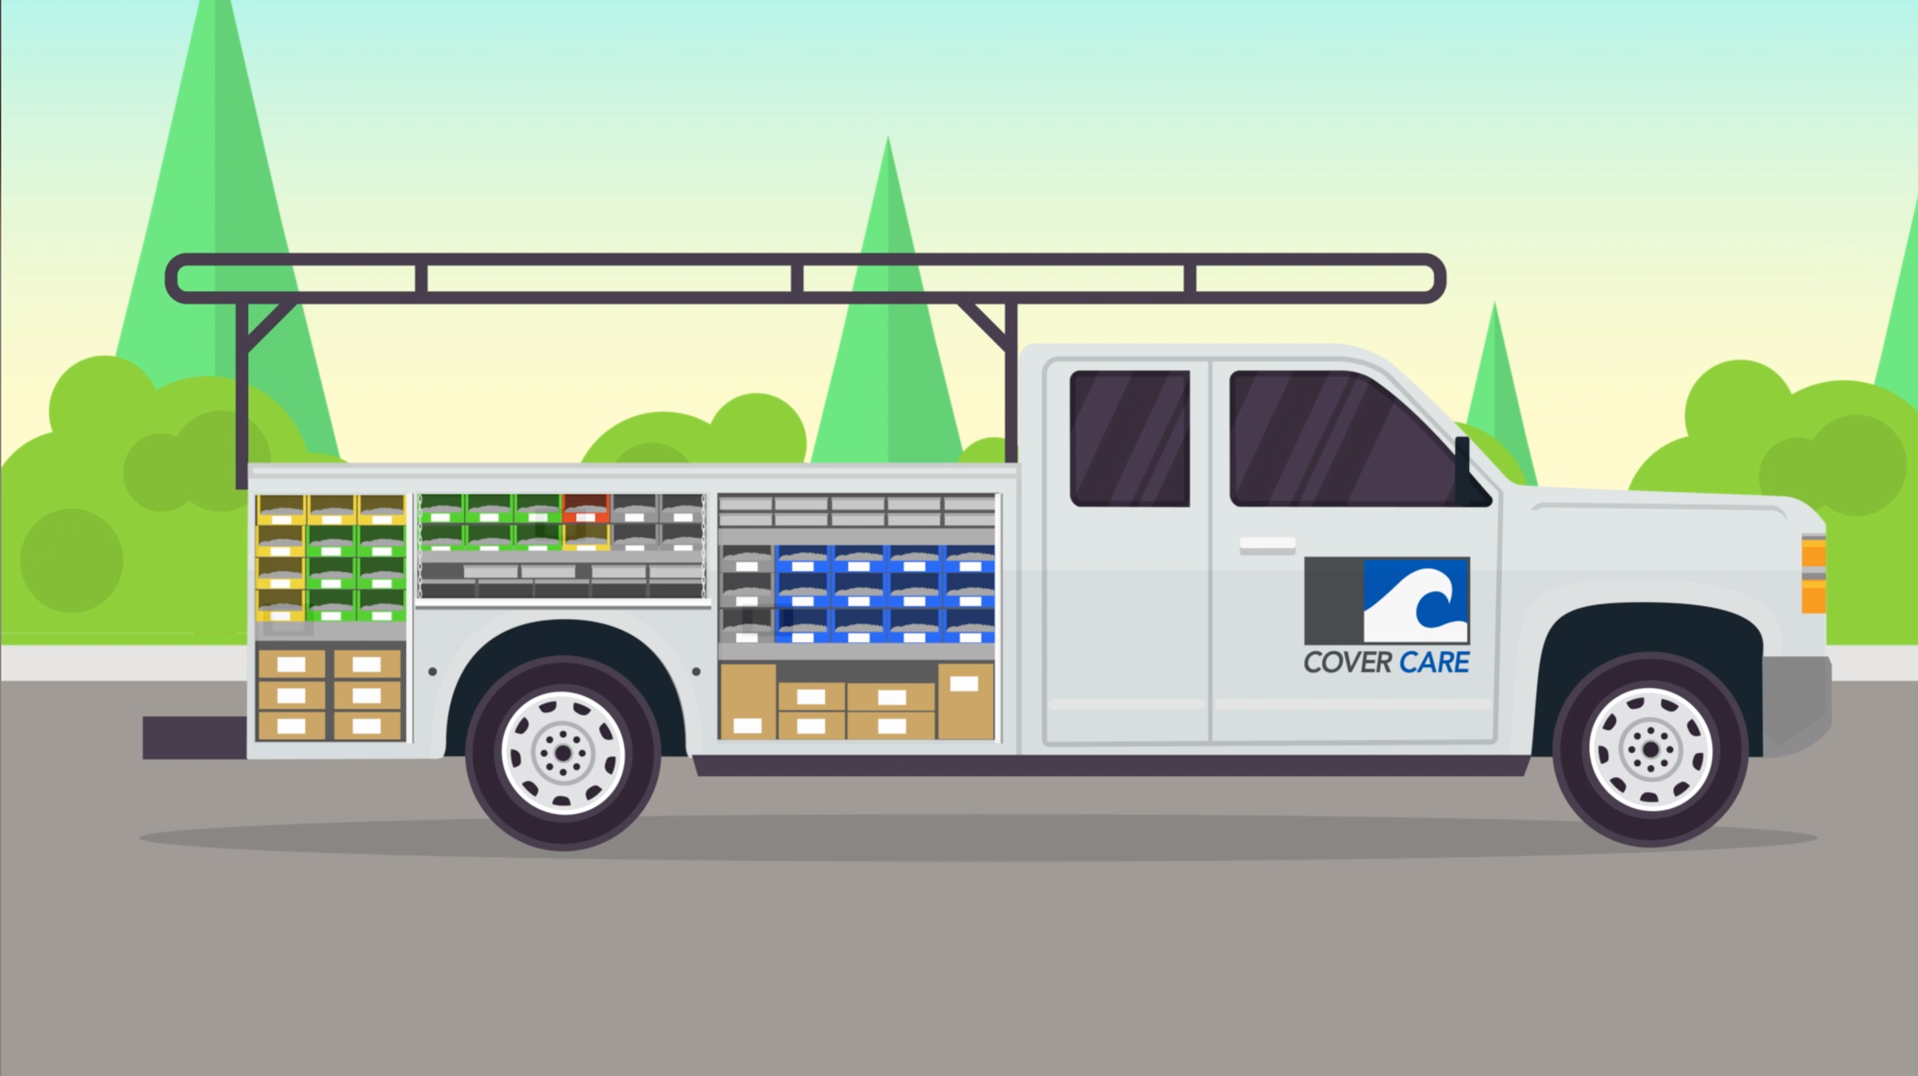 Cartoon image of a Cover Care, LLC truck